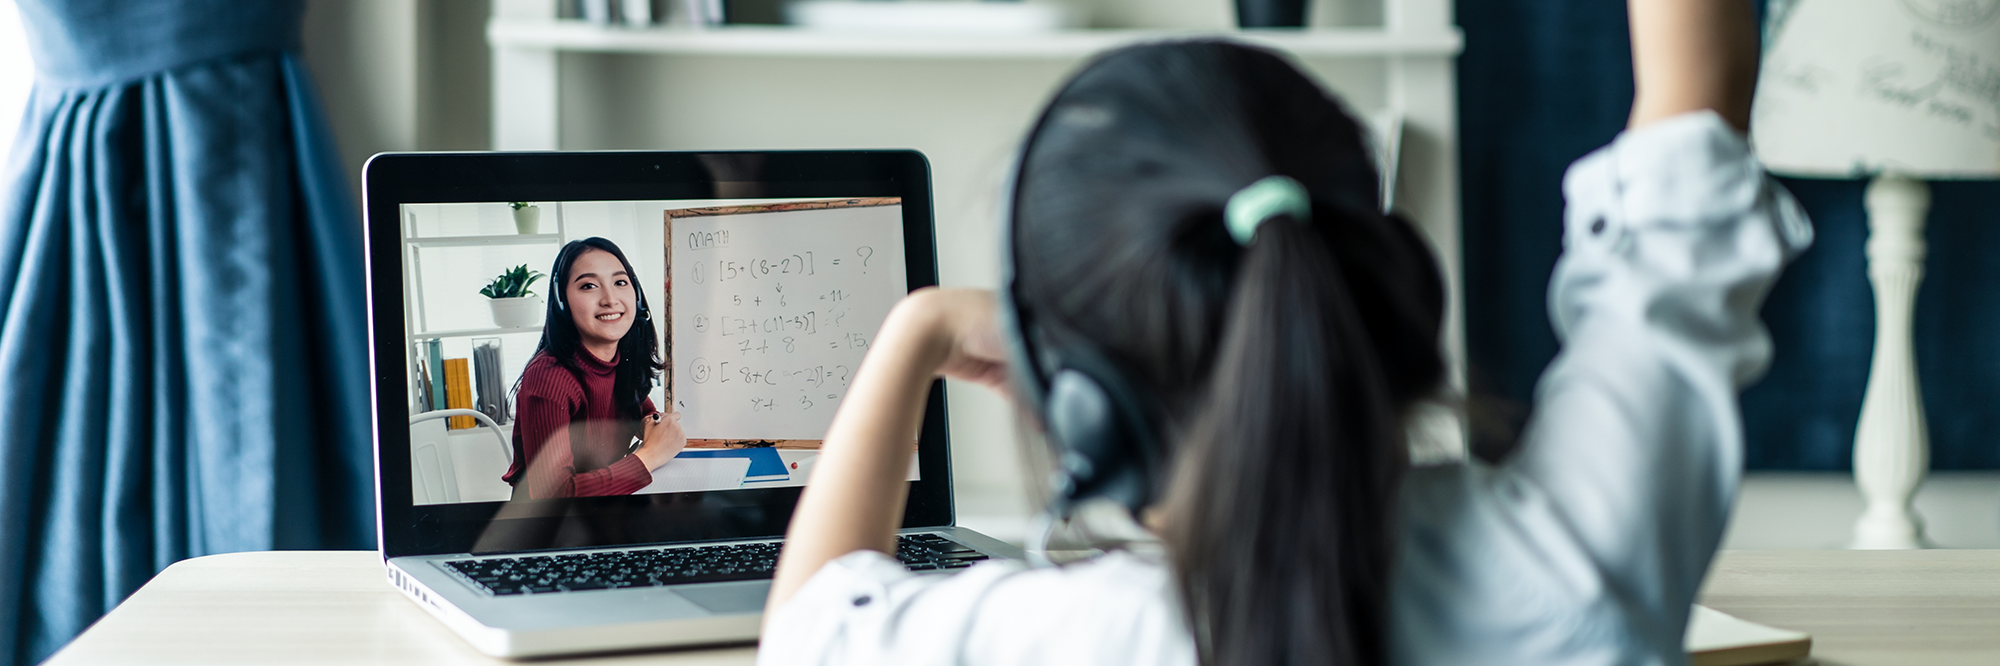 girl with her arm raised watching a virtual lesson on her laptop | Digital classroom